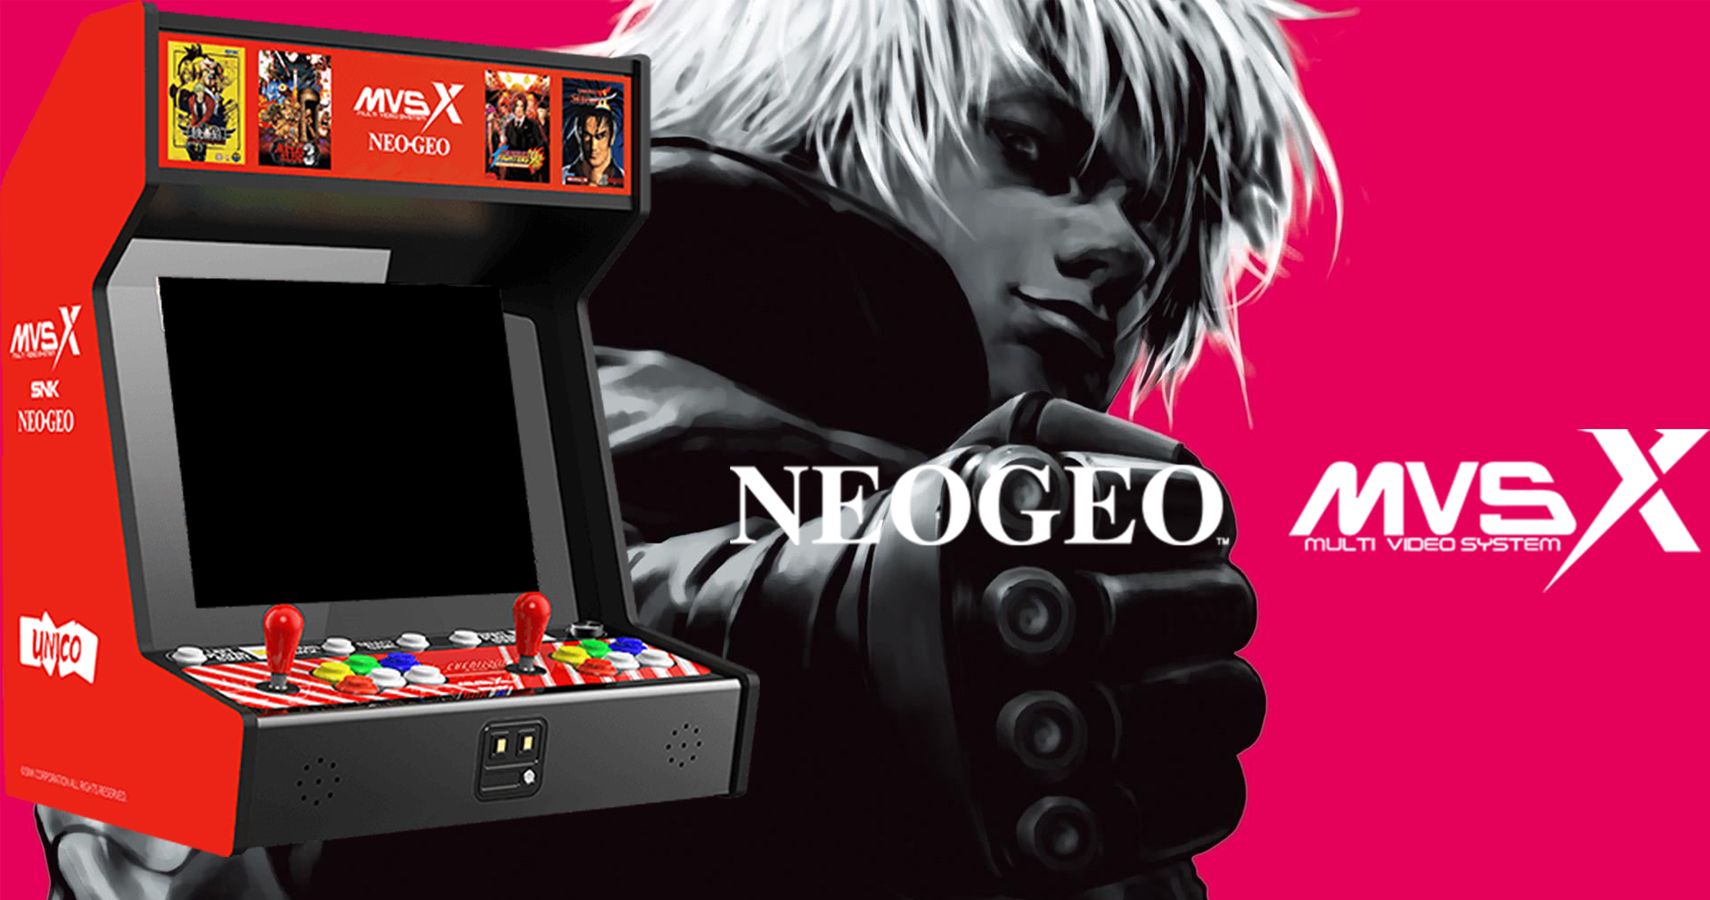 Relive The Arcade Days With SNK's MVSX Mini Home Arcade